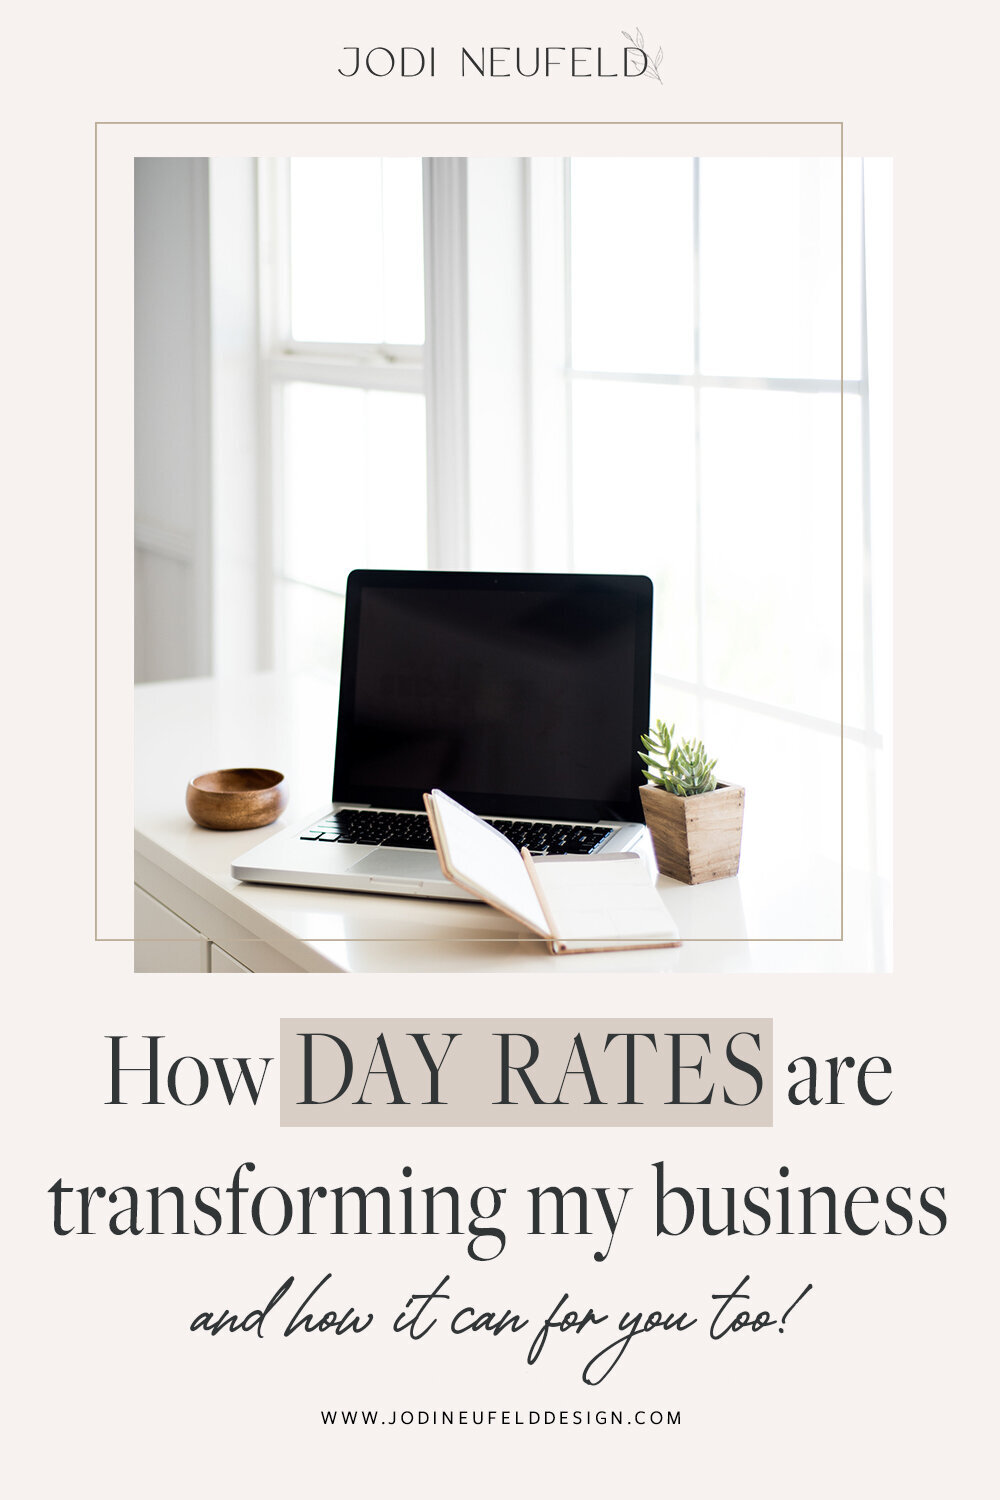 How day rates are transforming my business (and how they can for yours too!